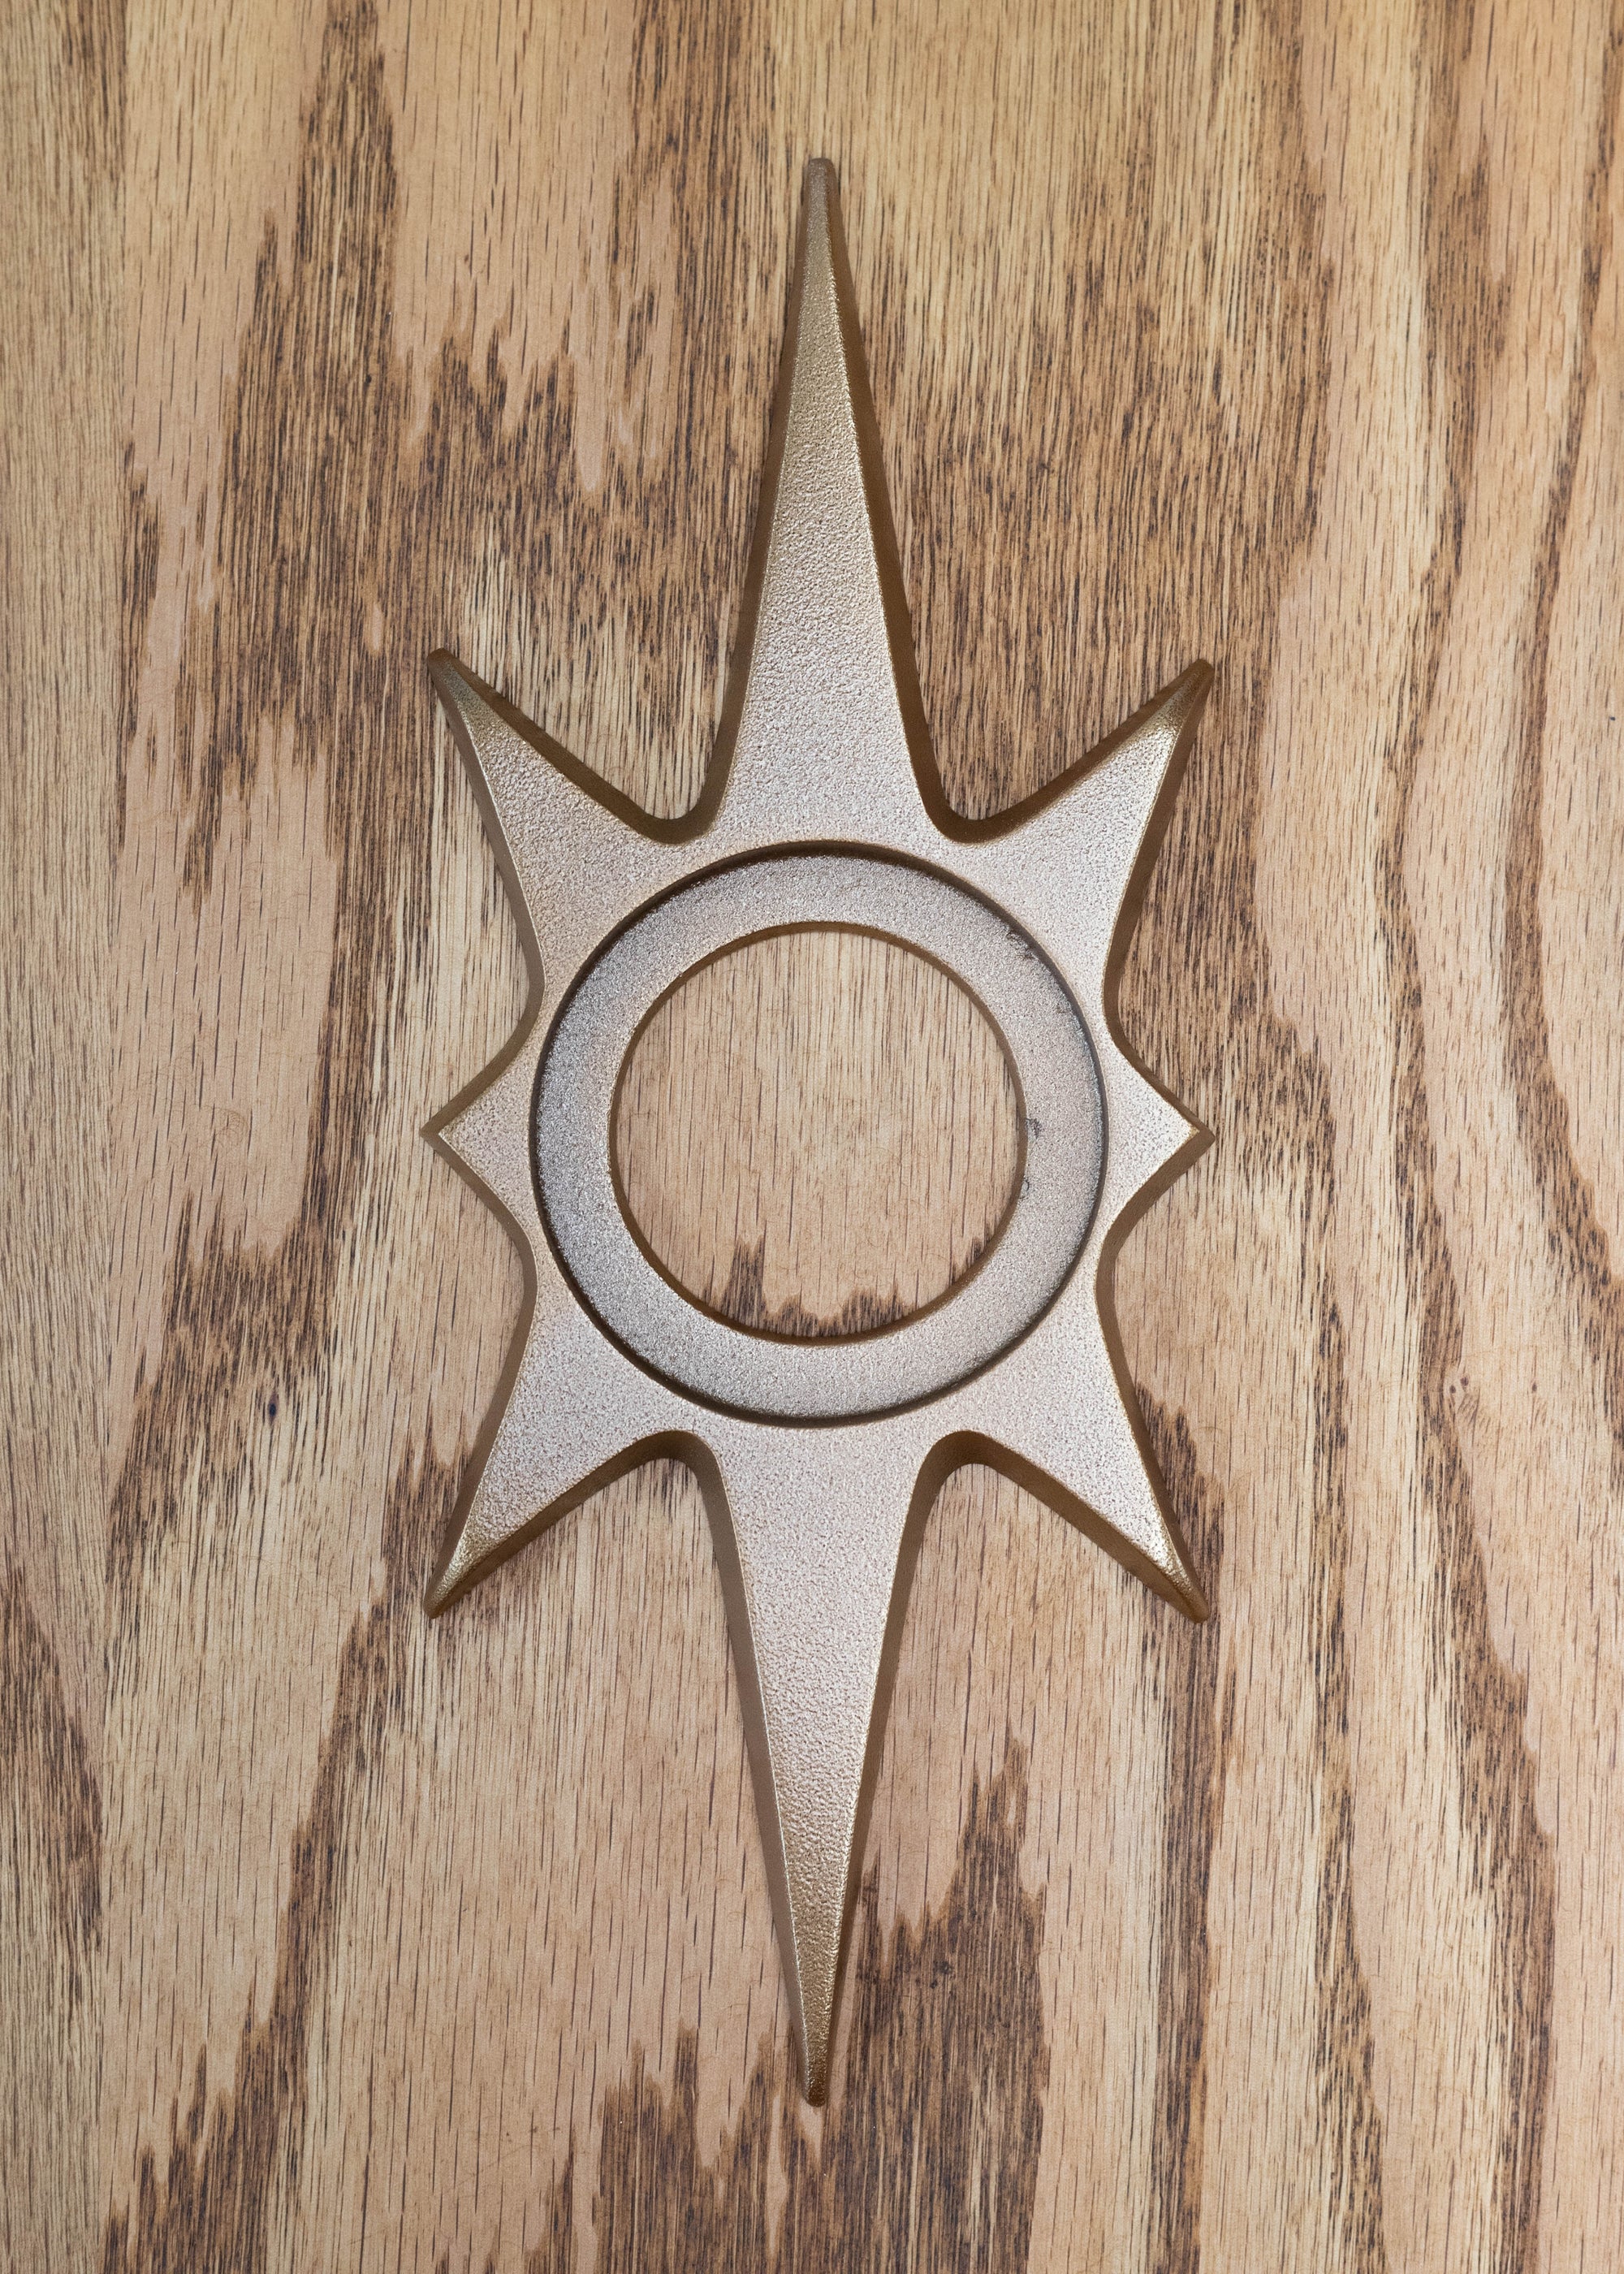 The antique bronze starburst escutcheon. The antique bronze powder coating provides a smooth but more natural metallic finish that has shine but is not glossy like a polish. 